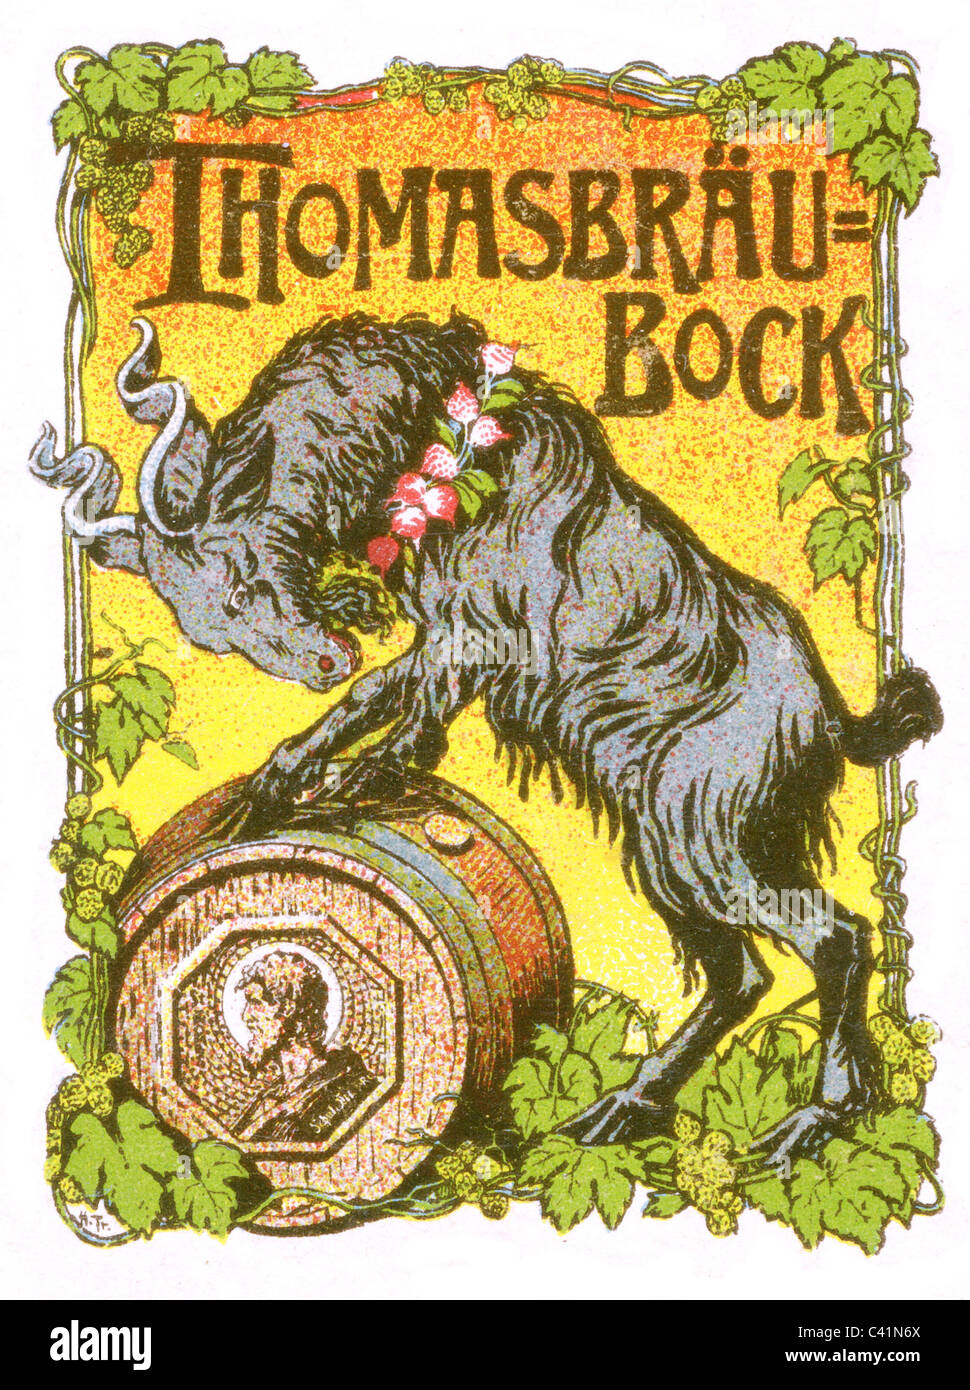 advertising, beer, Thomasbraeu - Bock, poster stamp, Munich, circa 1900, Additional-Rights-Clearences-Not Available Stock Photo